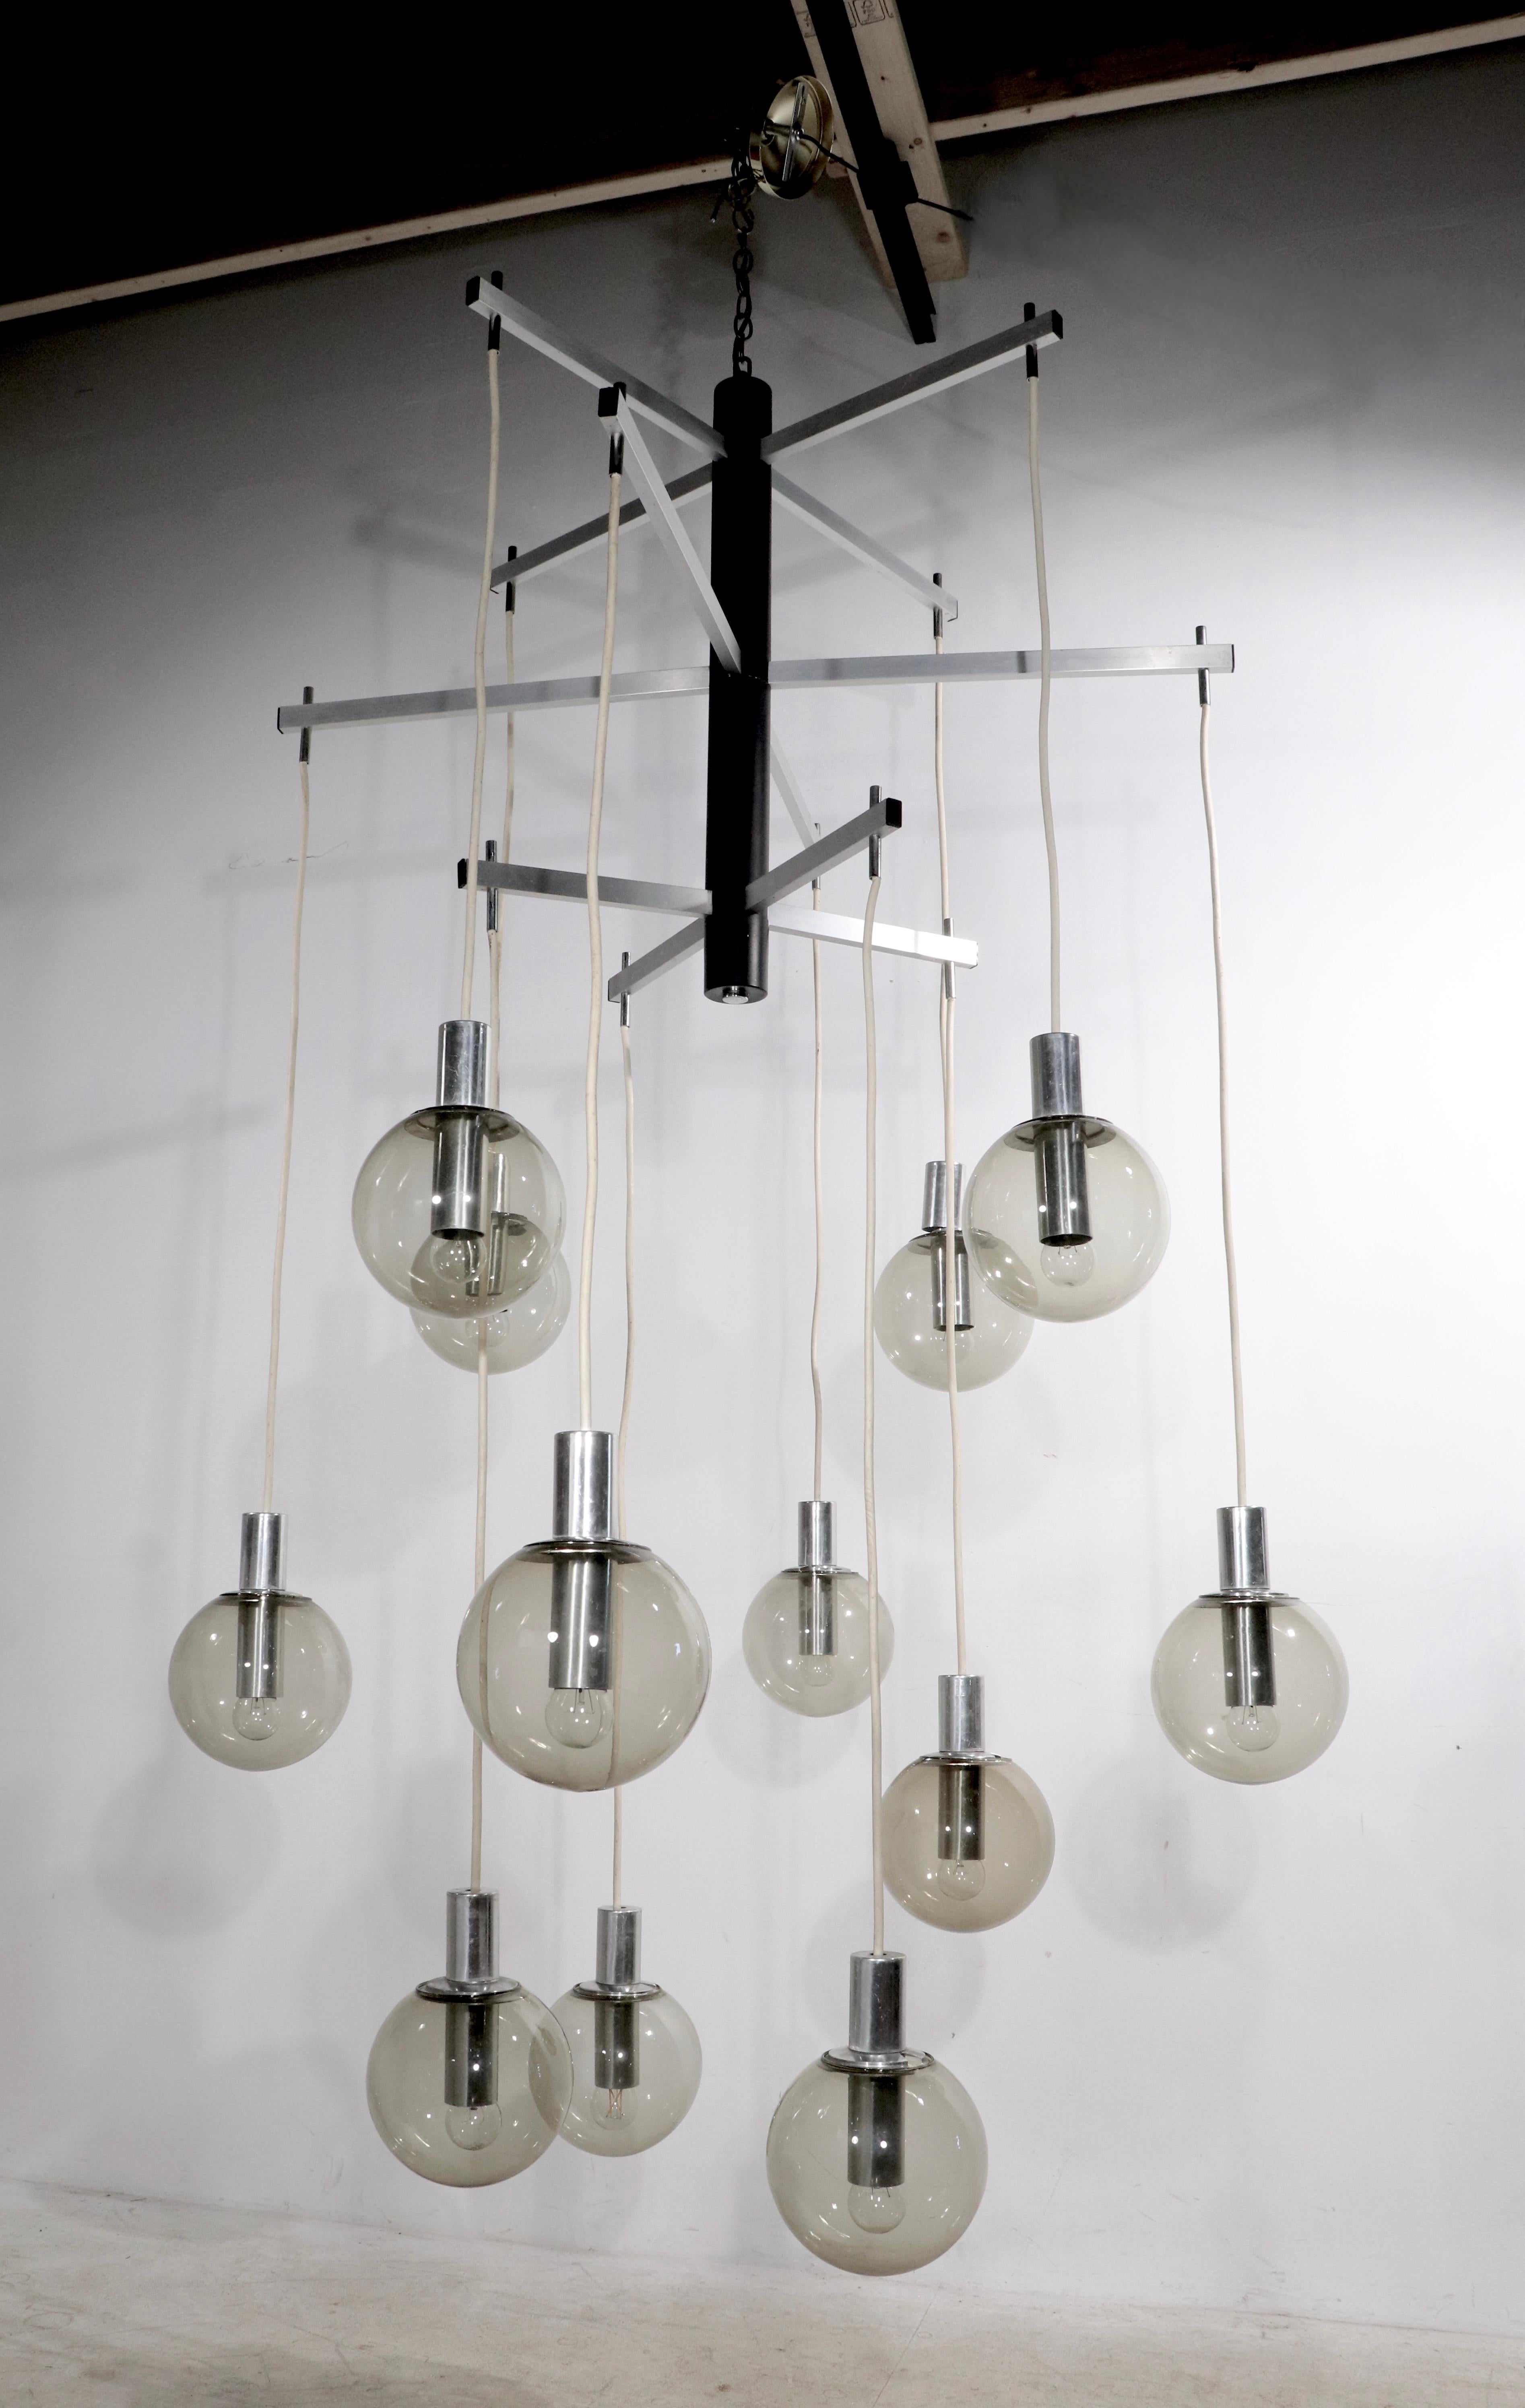 20th Century Large Modernist 12 Light Chandelier with Tinted Glass Ball Shades Ca. 1970's For Sale